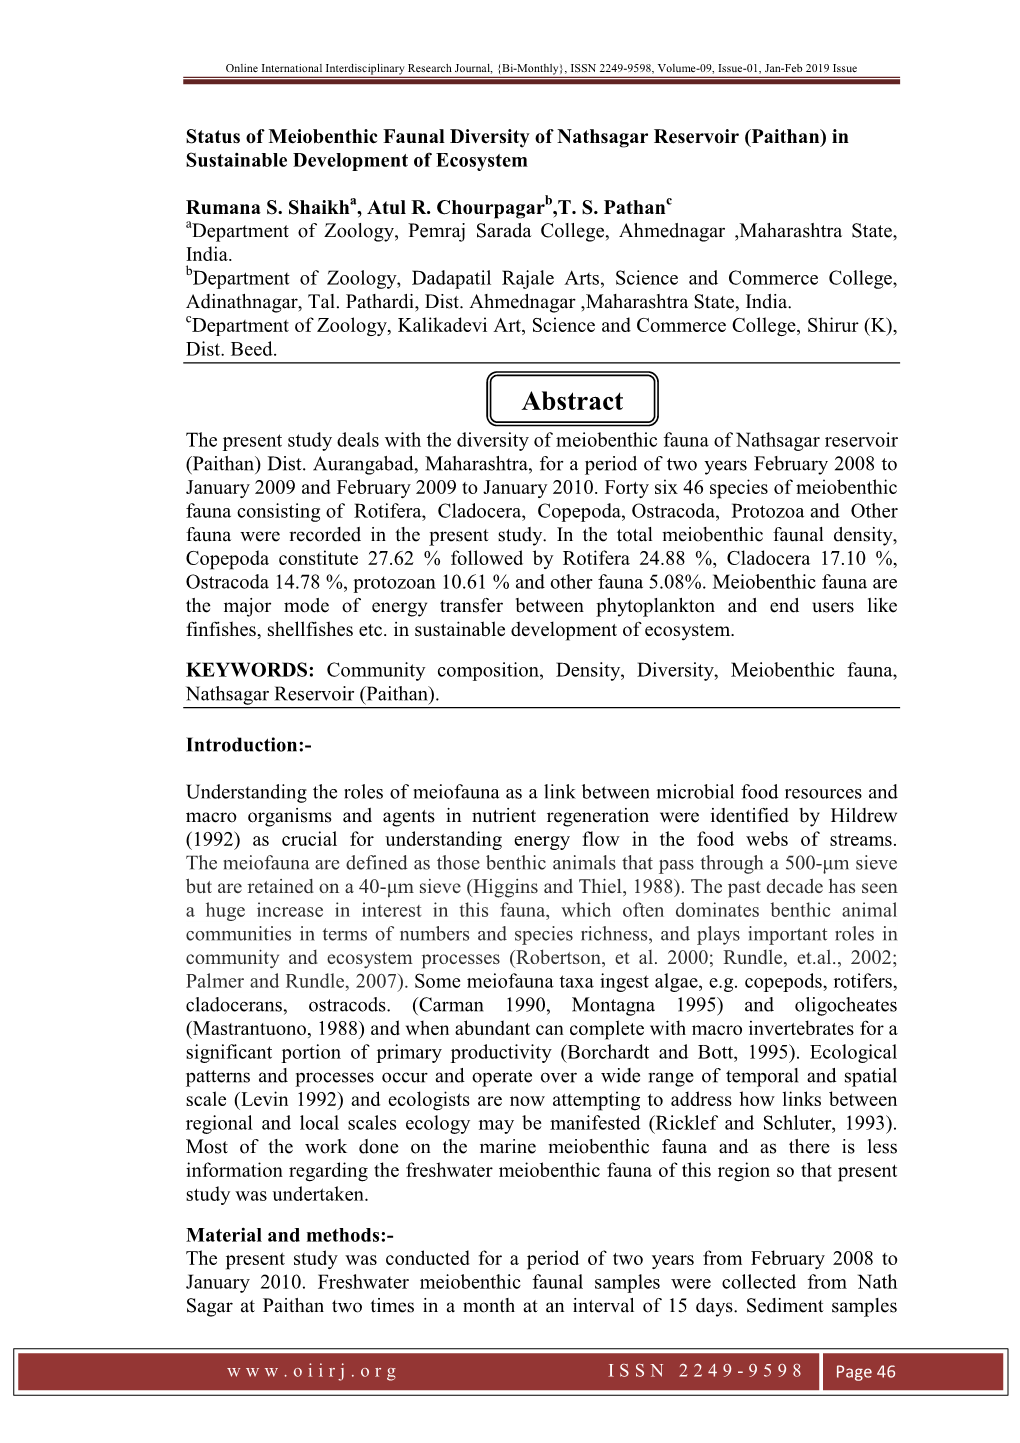 Abstract the Present Study Deals with the Diversity of Meiobenthic Fauna of Nathsagar Reservoir (Paithan) Dist